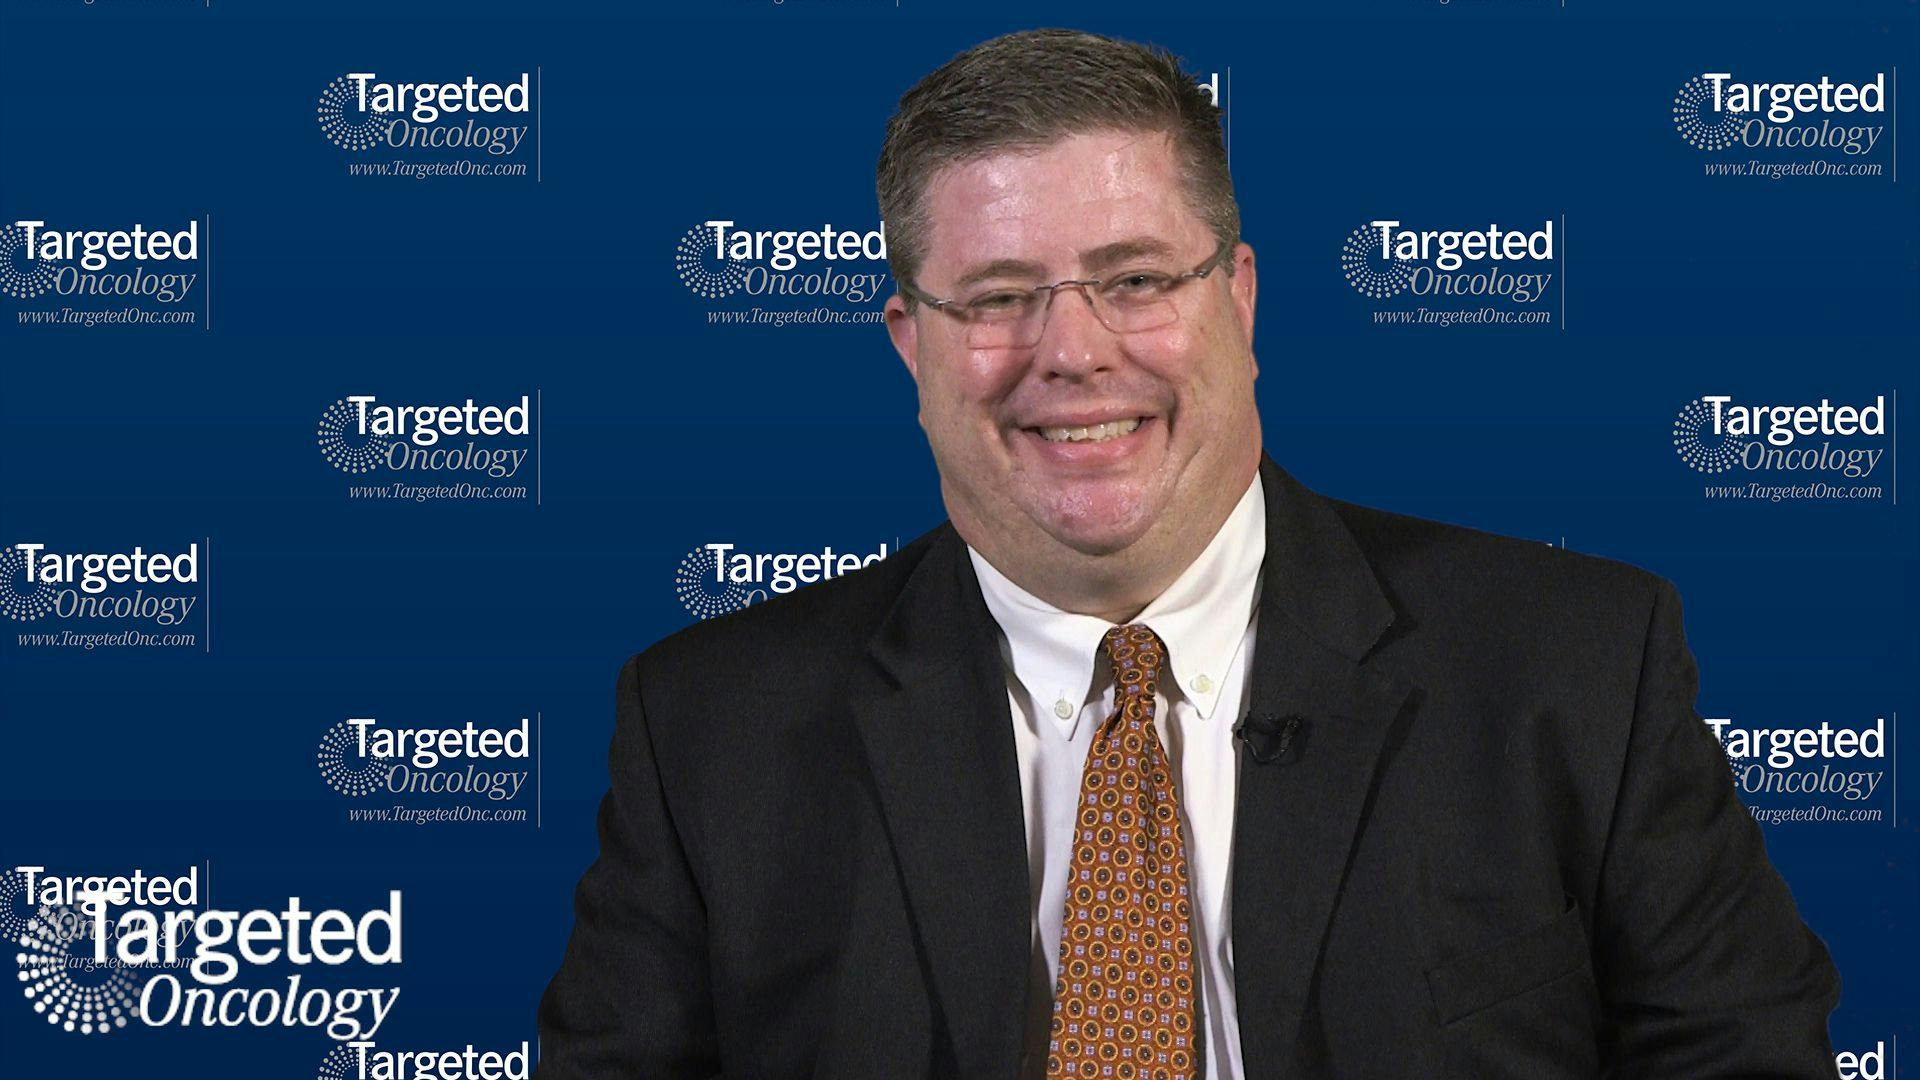 The Therapeutic Approach for Malignant Melanoma: Case 1